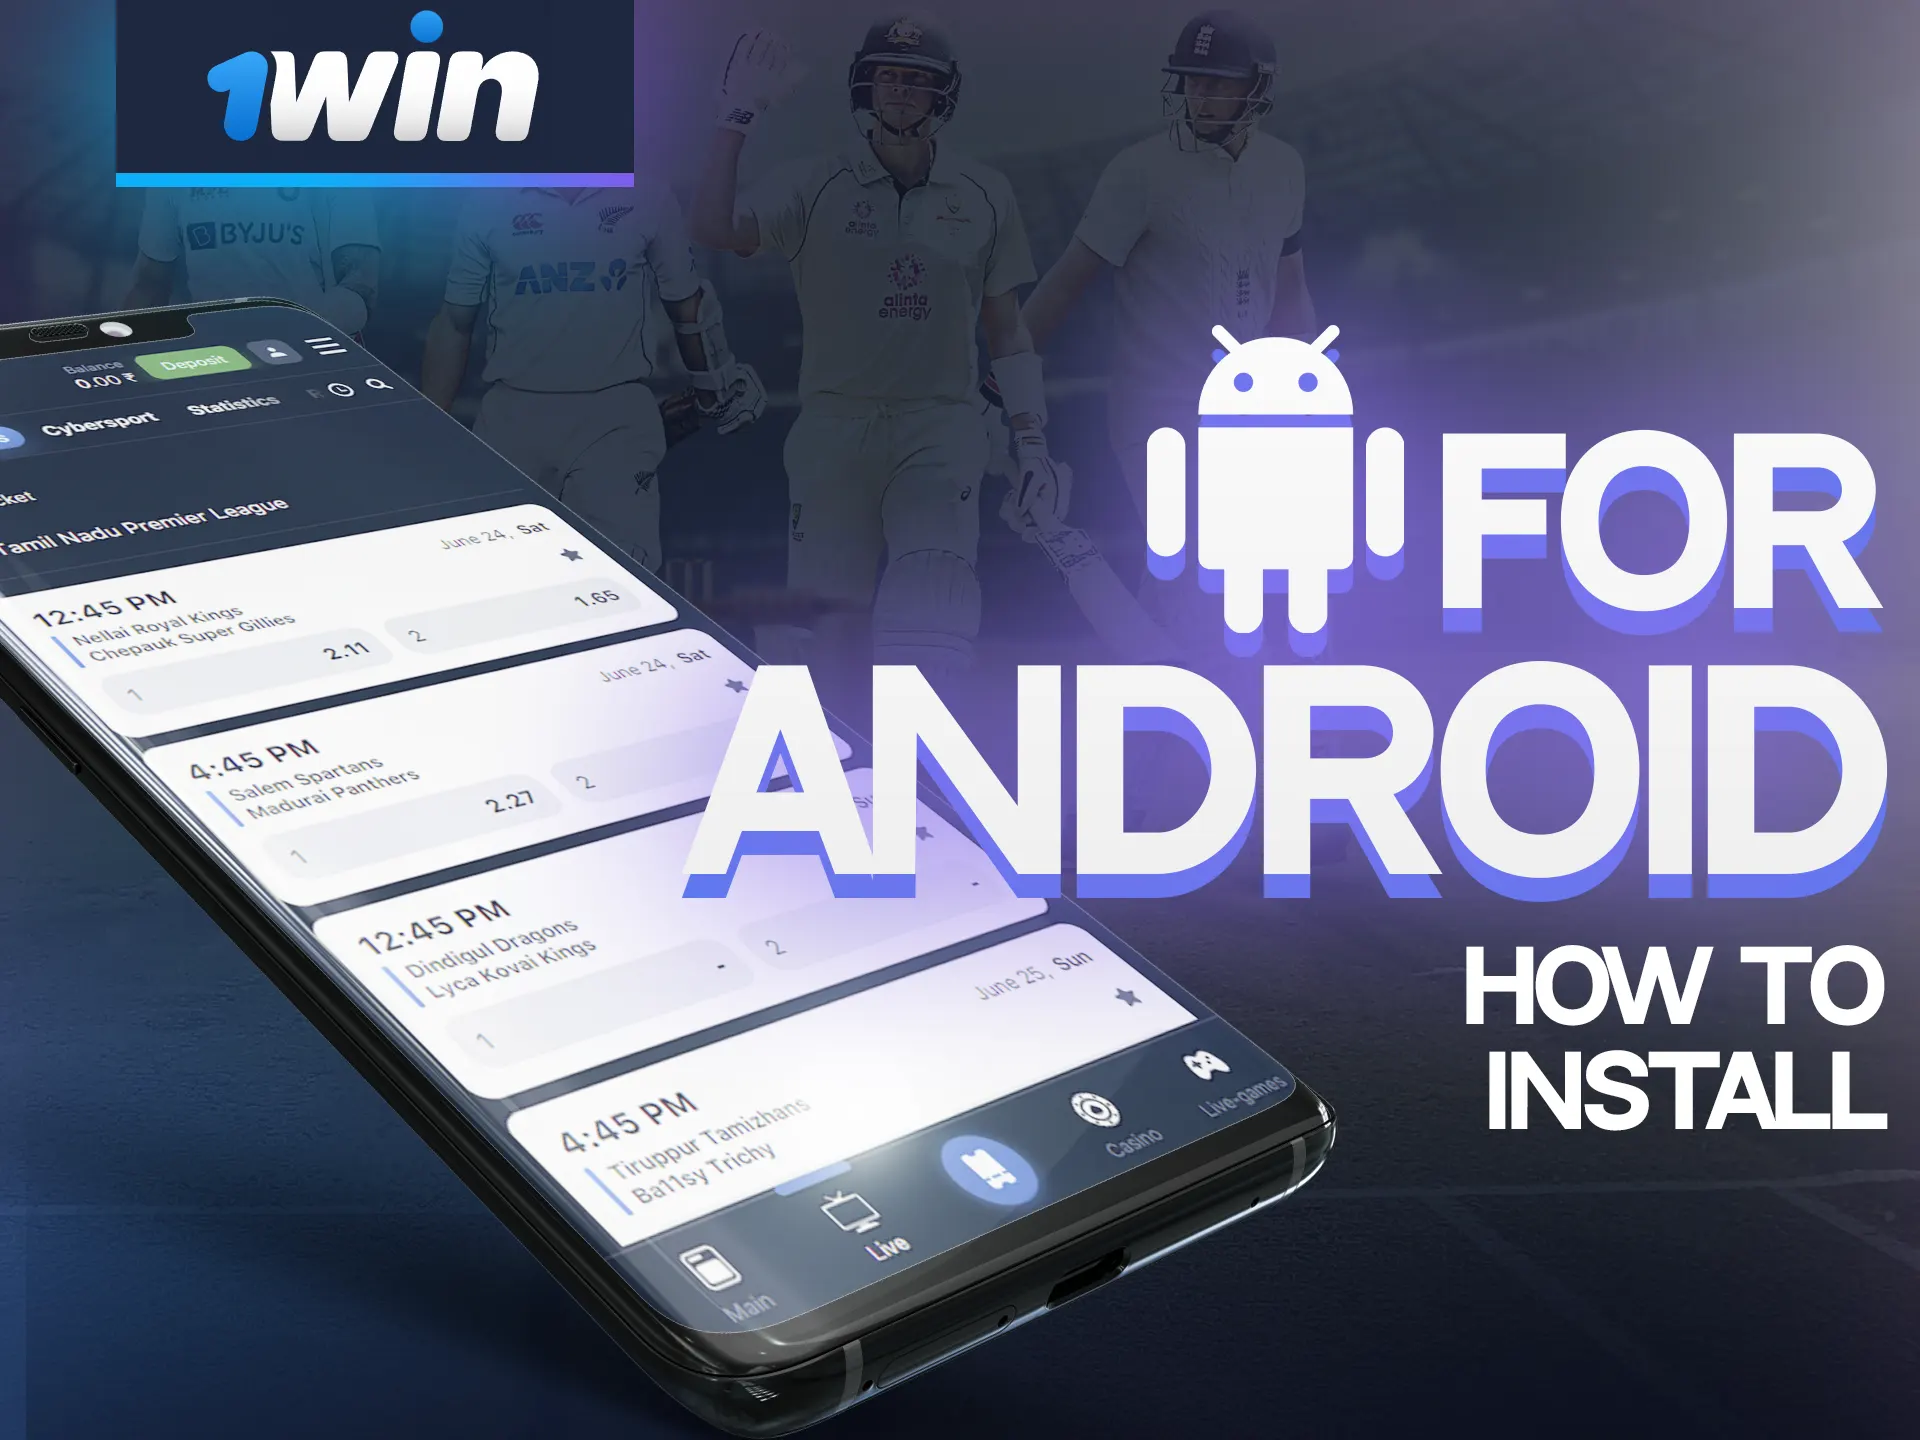 With these instructions, install the 1Win app on your Android phone quickly.